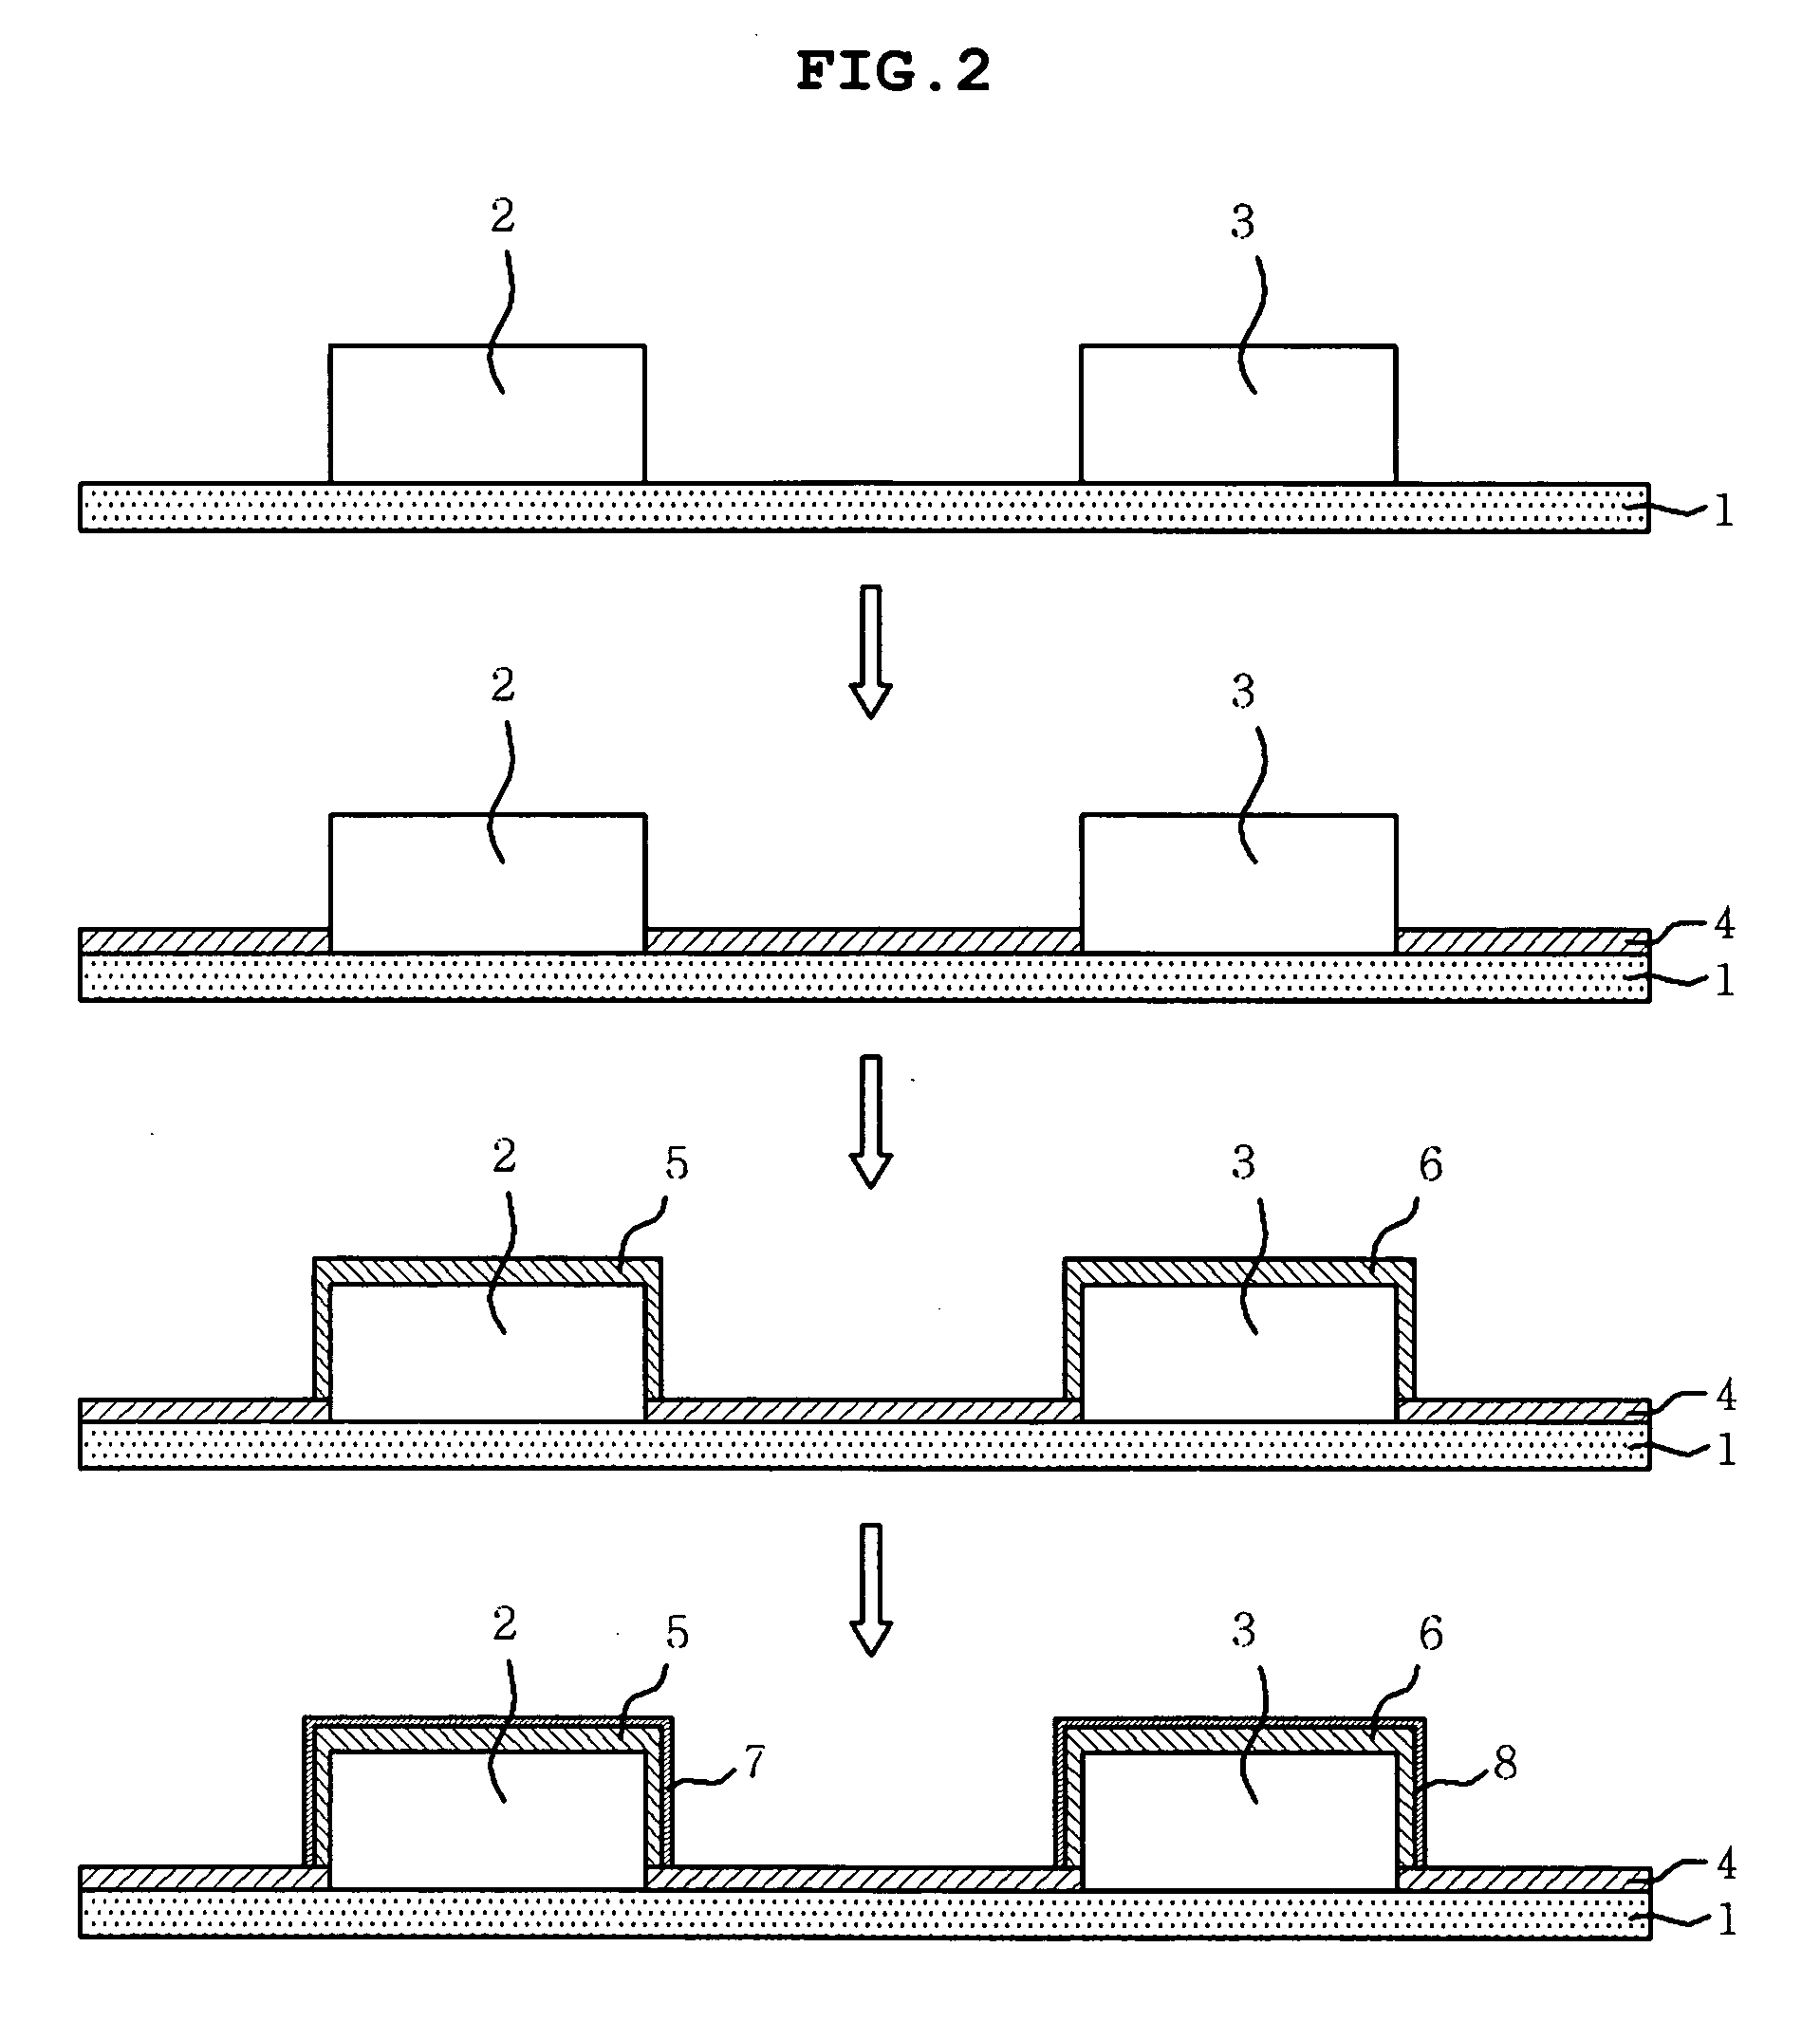 Method for plating printed circuit board and printed circuit board manufactured therefrom